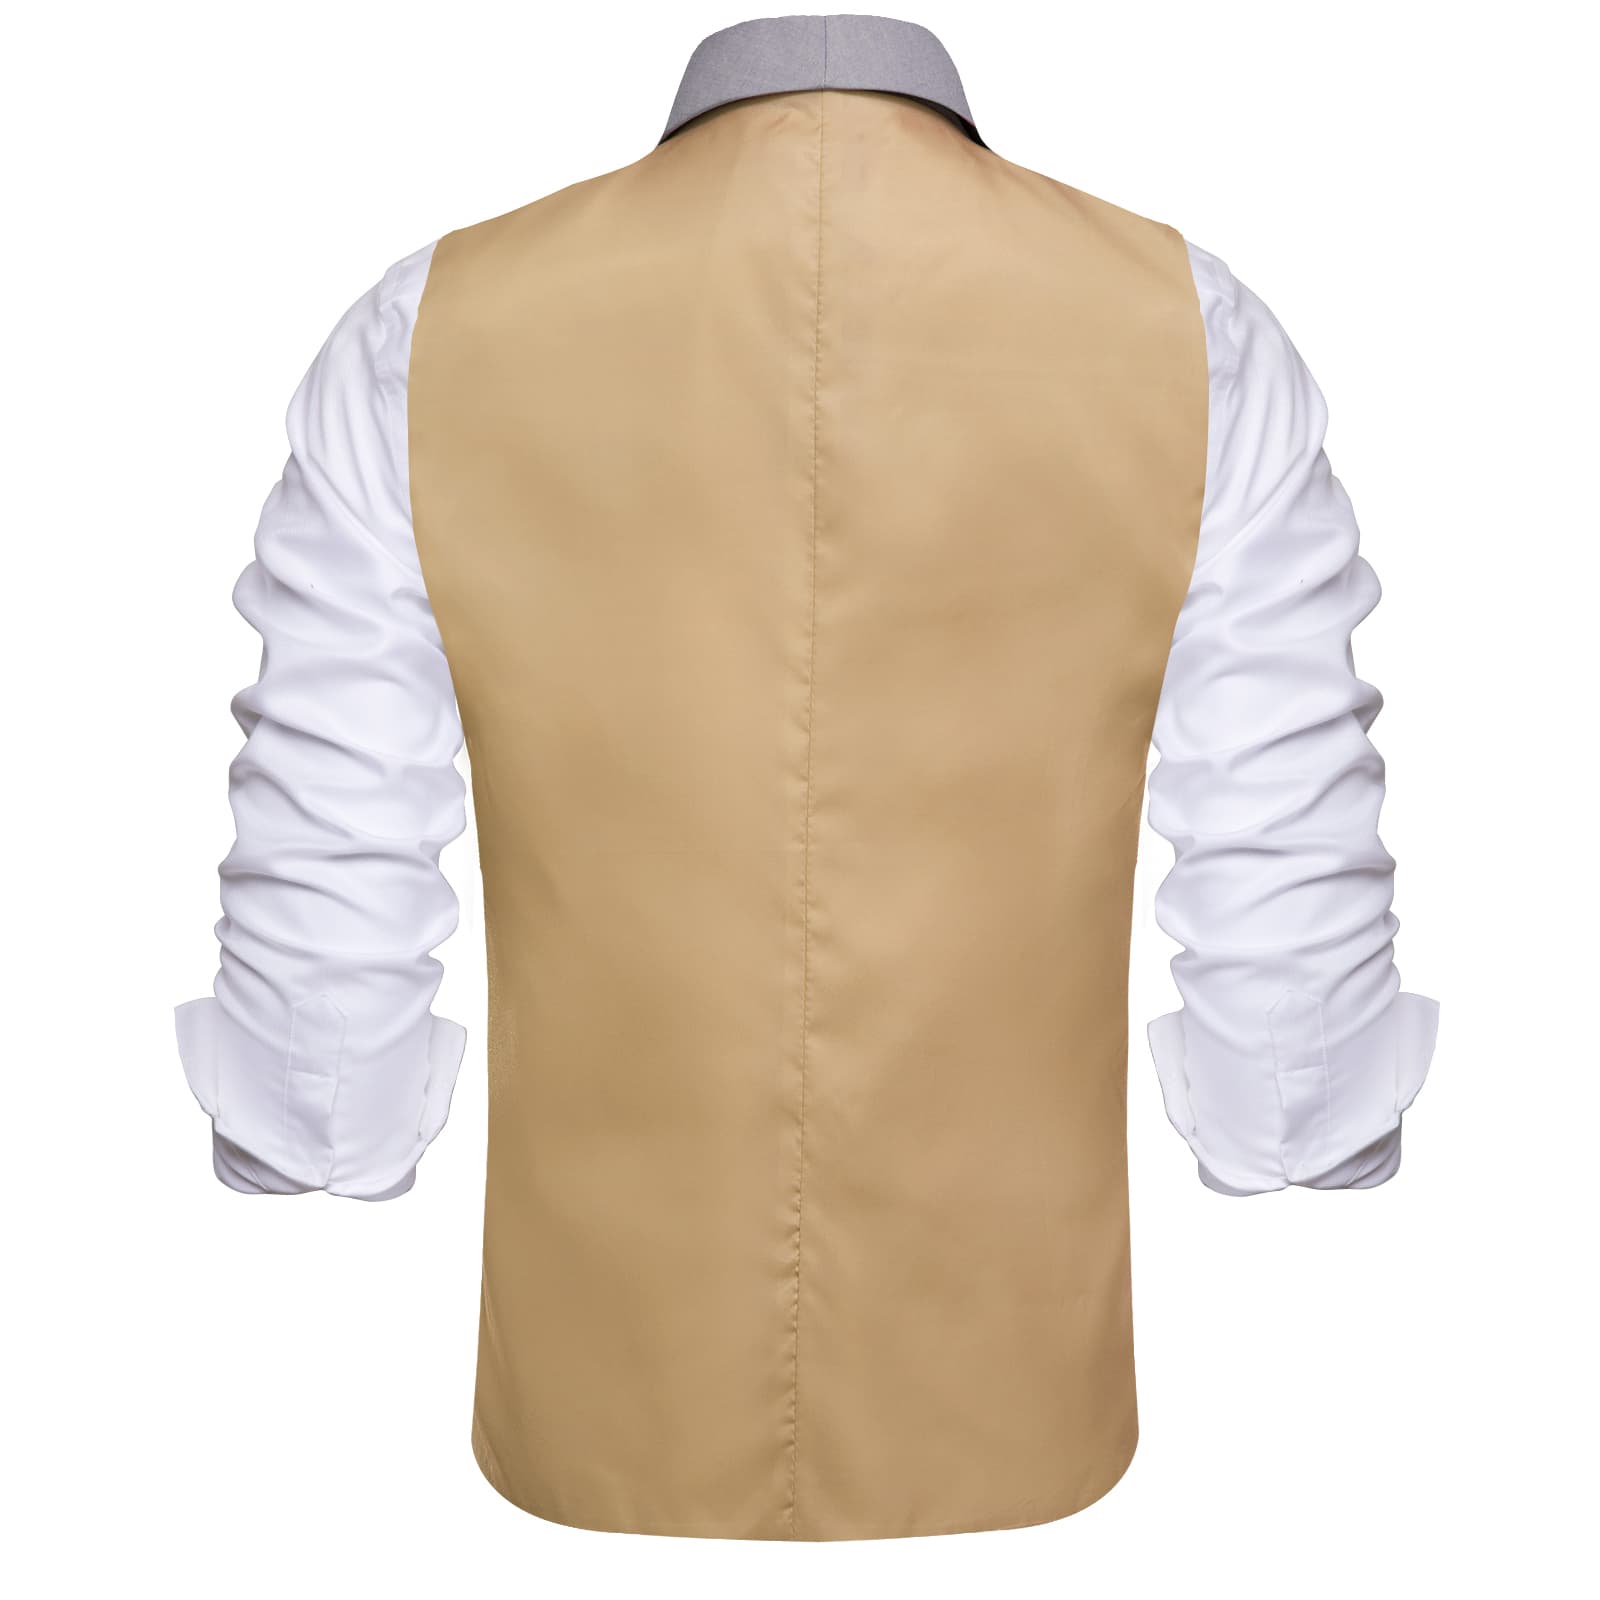 Grey Shawl Collar Beige Solid Waistcoat Formal Vests for Business